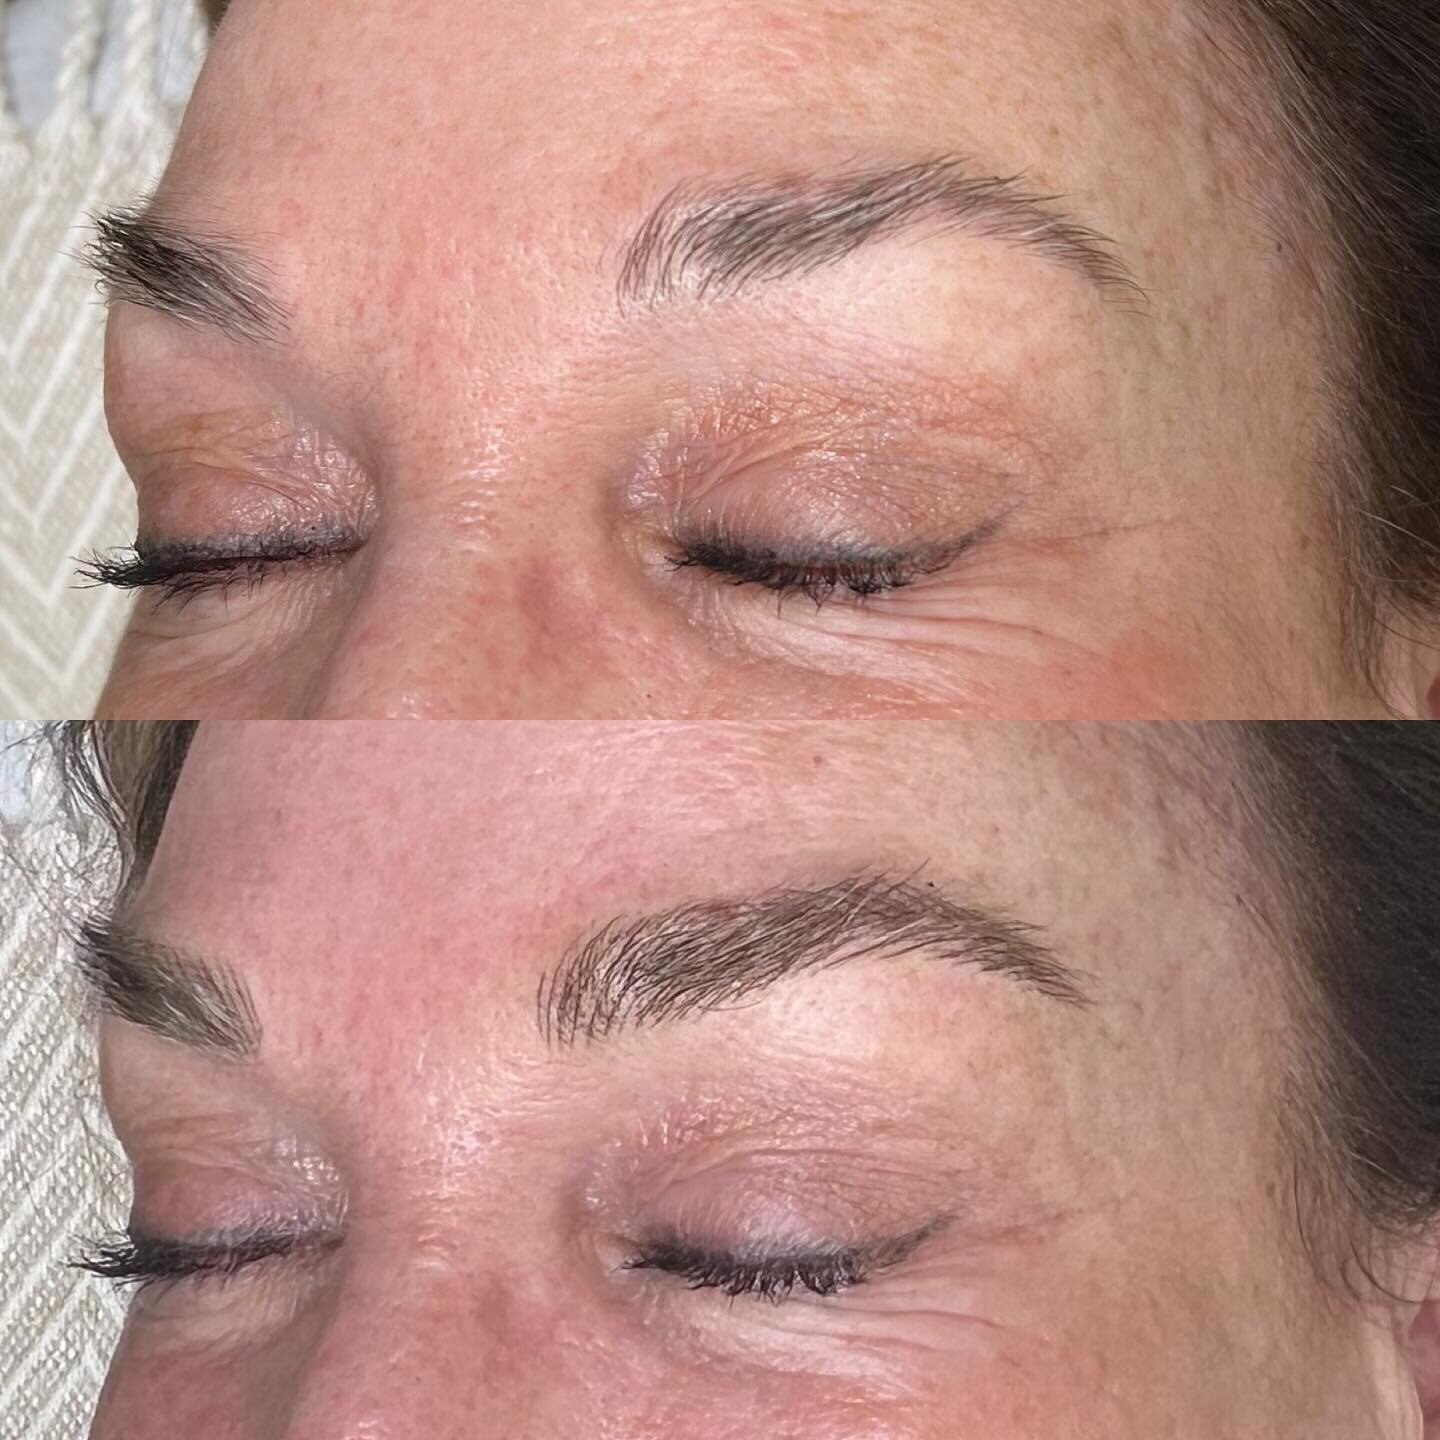 Microblading can definitely look natural! How? Just blend them in with your own eyebrow hairs to fill in the sparse areas. 

It takes 7-10 days after procedure for the outer layer of your skin to be healed so that you can wear makeup and sunscreen bu